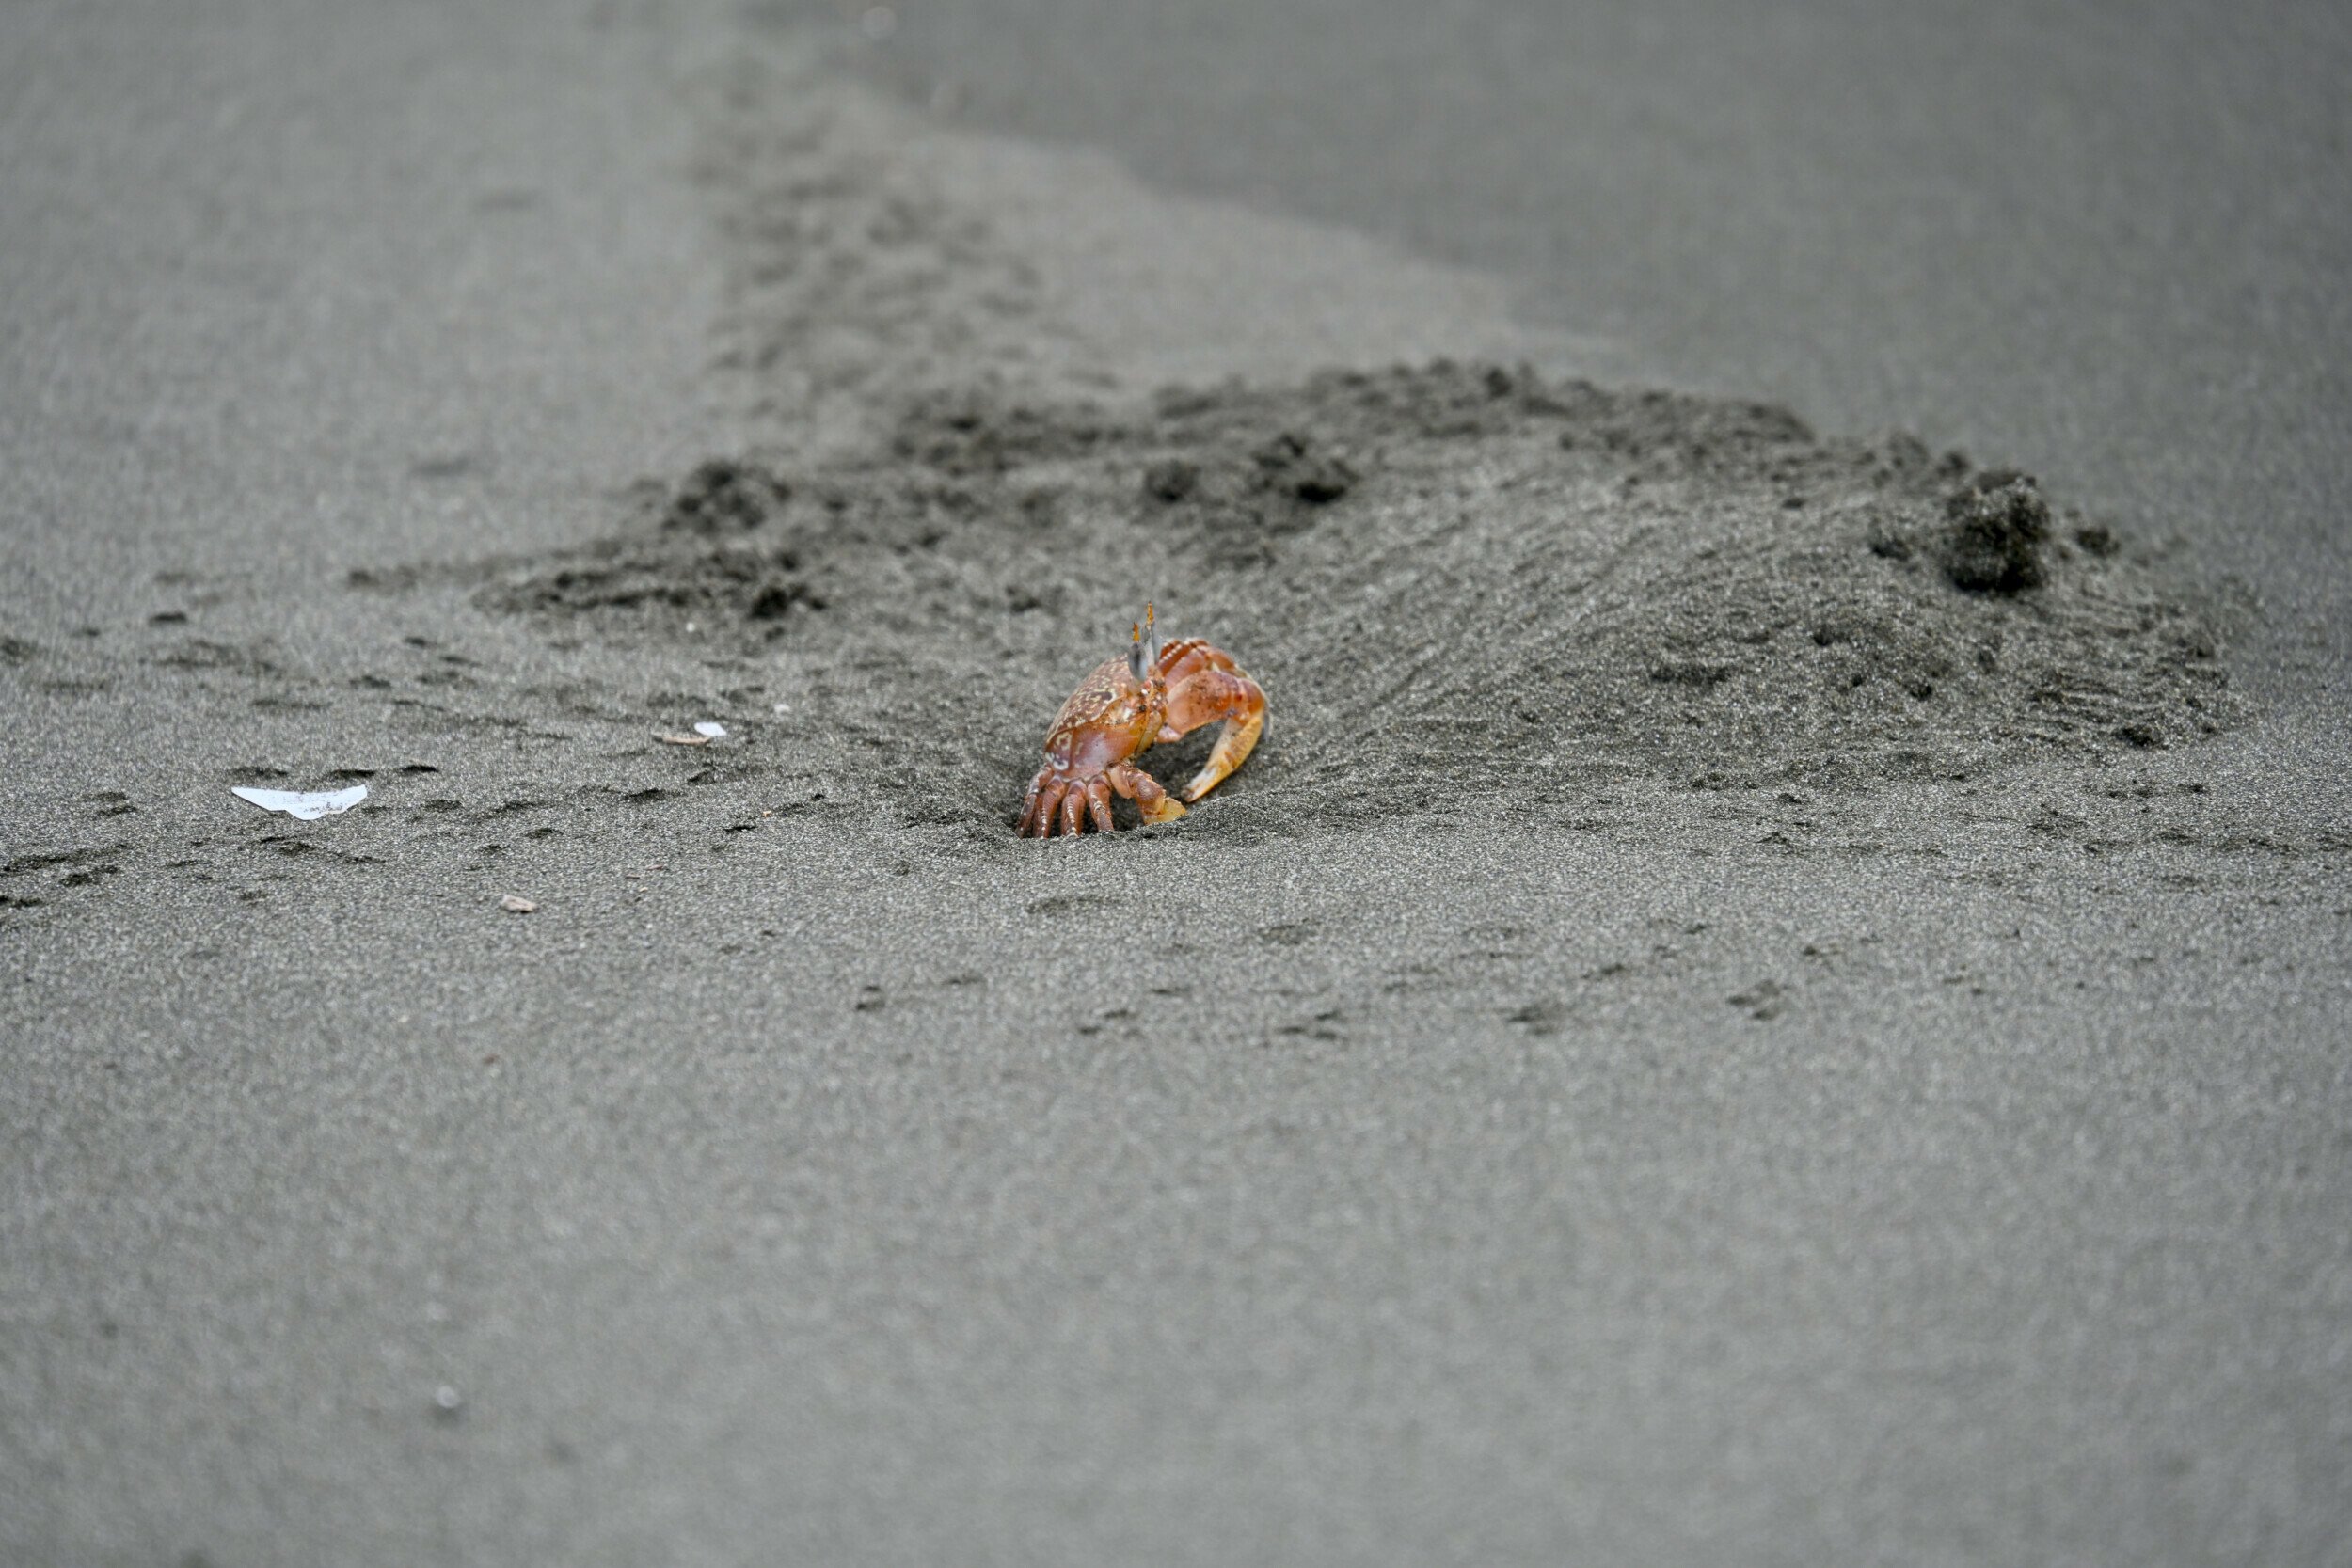 A ghost crab navigating the volcanic sands of Palo Seco Beach, Costa Rica, with its tracks etched behind.